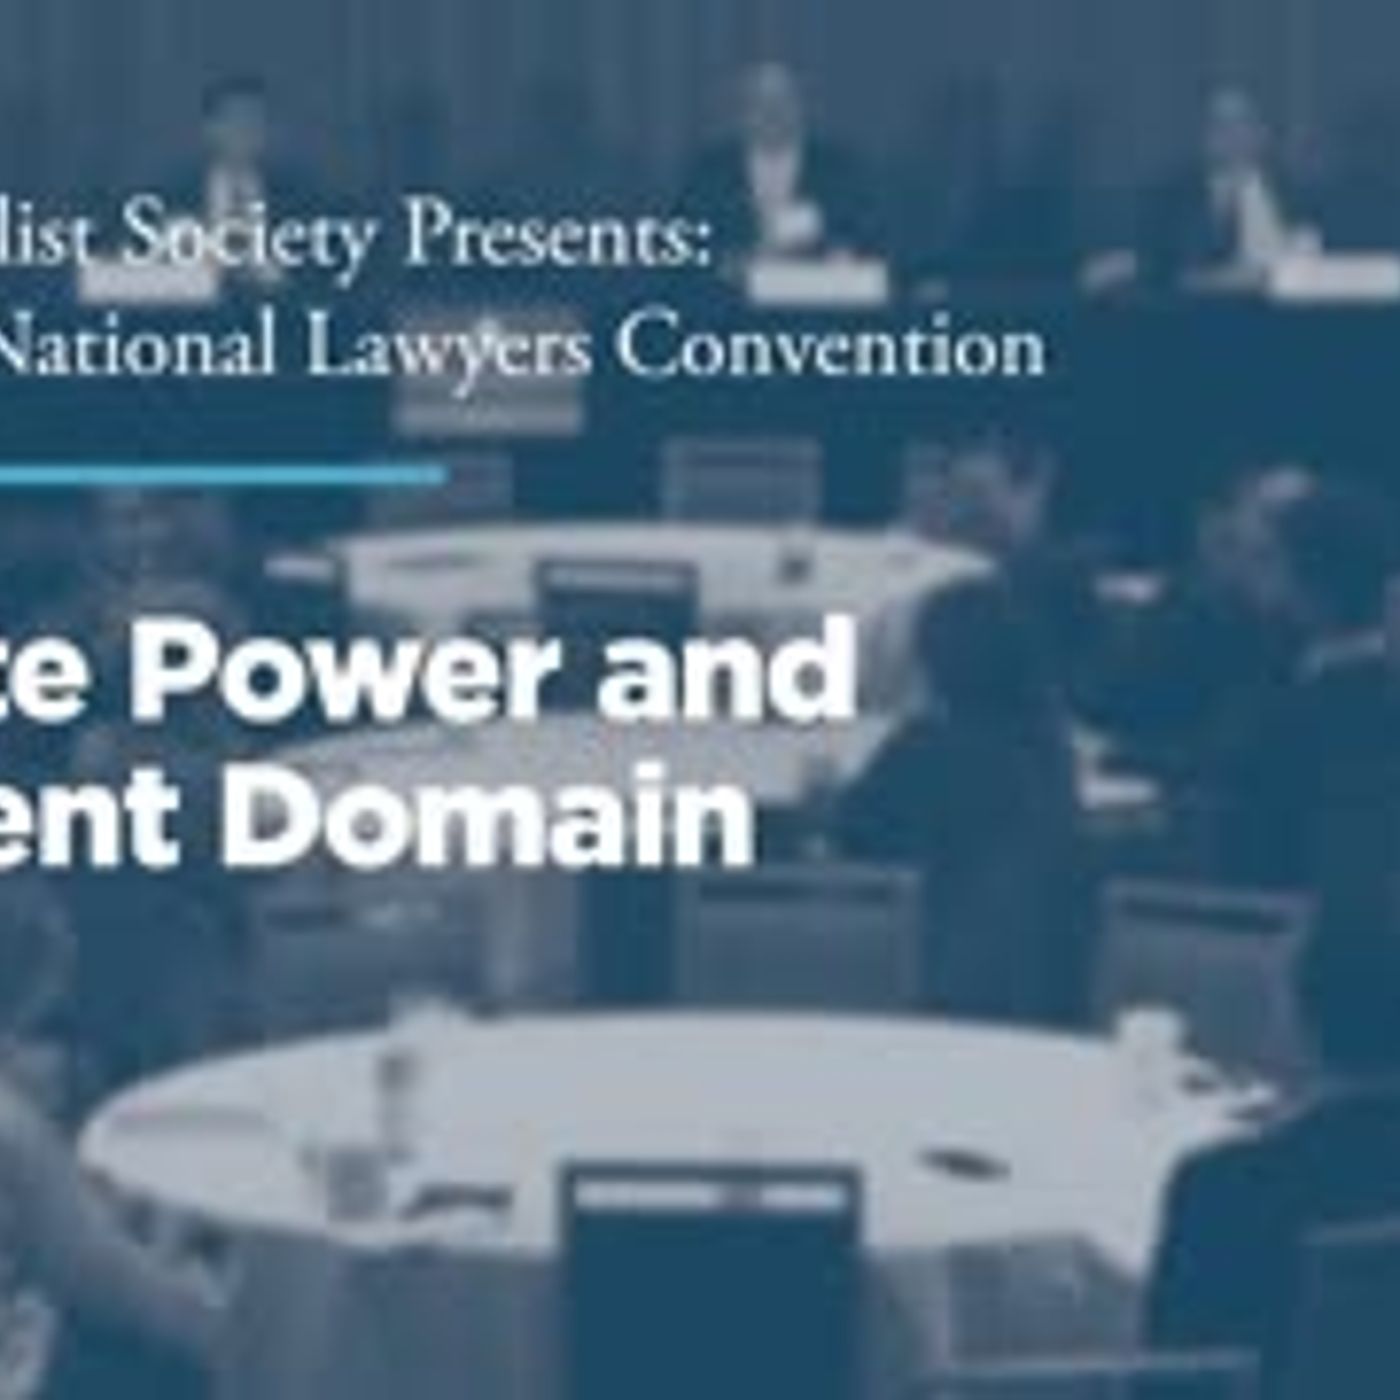 Private Power and Eminent Domain